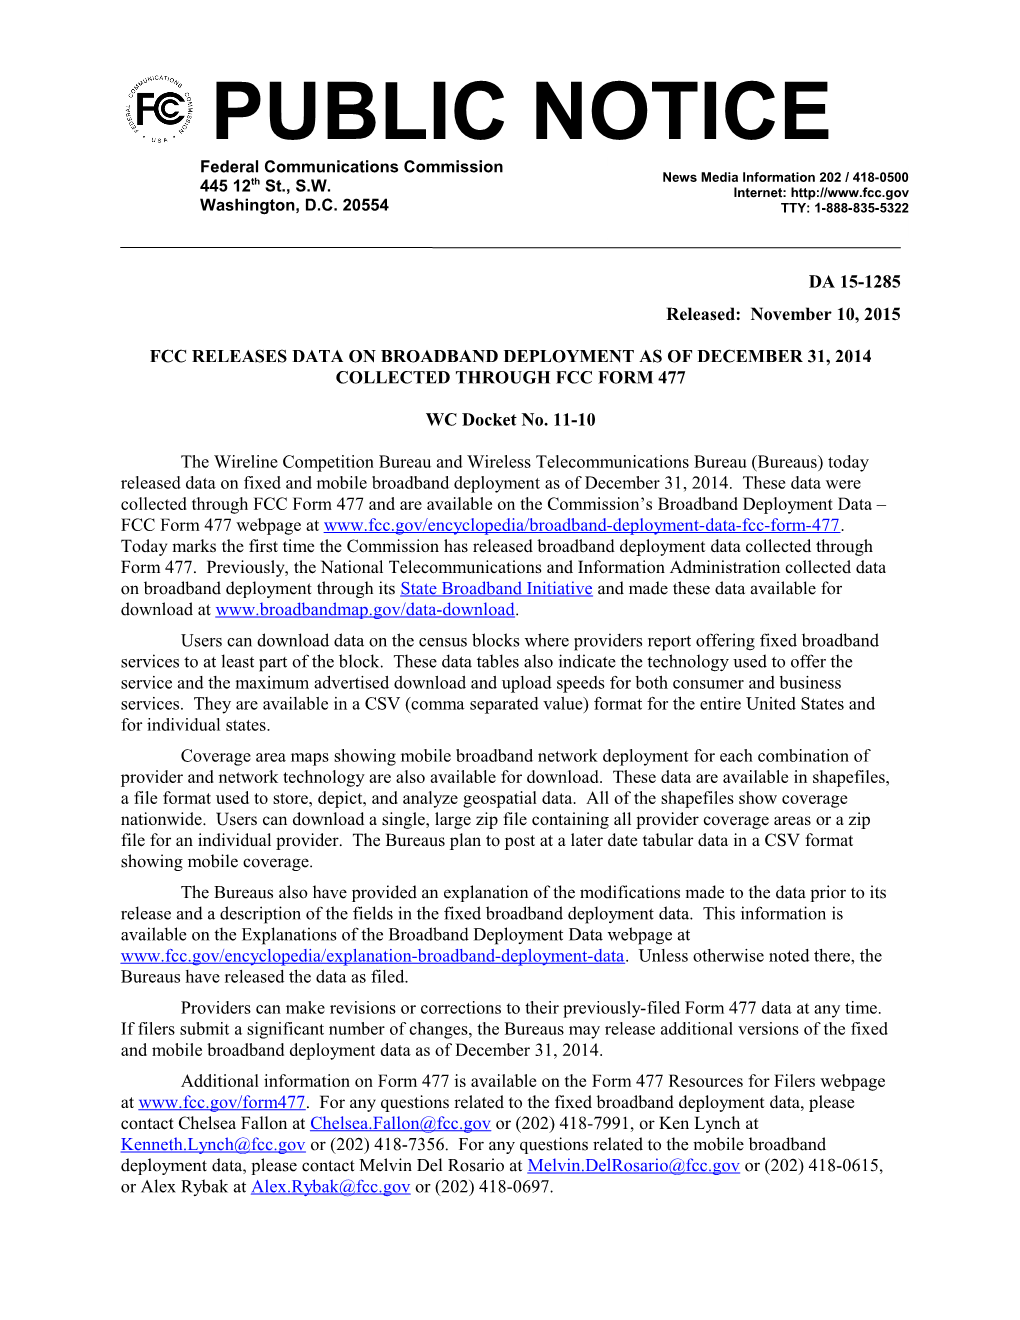 Fcc Releases Data on Broadband Deployment As of December 31, 2014 Collected Through Fcc